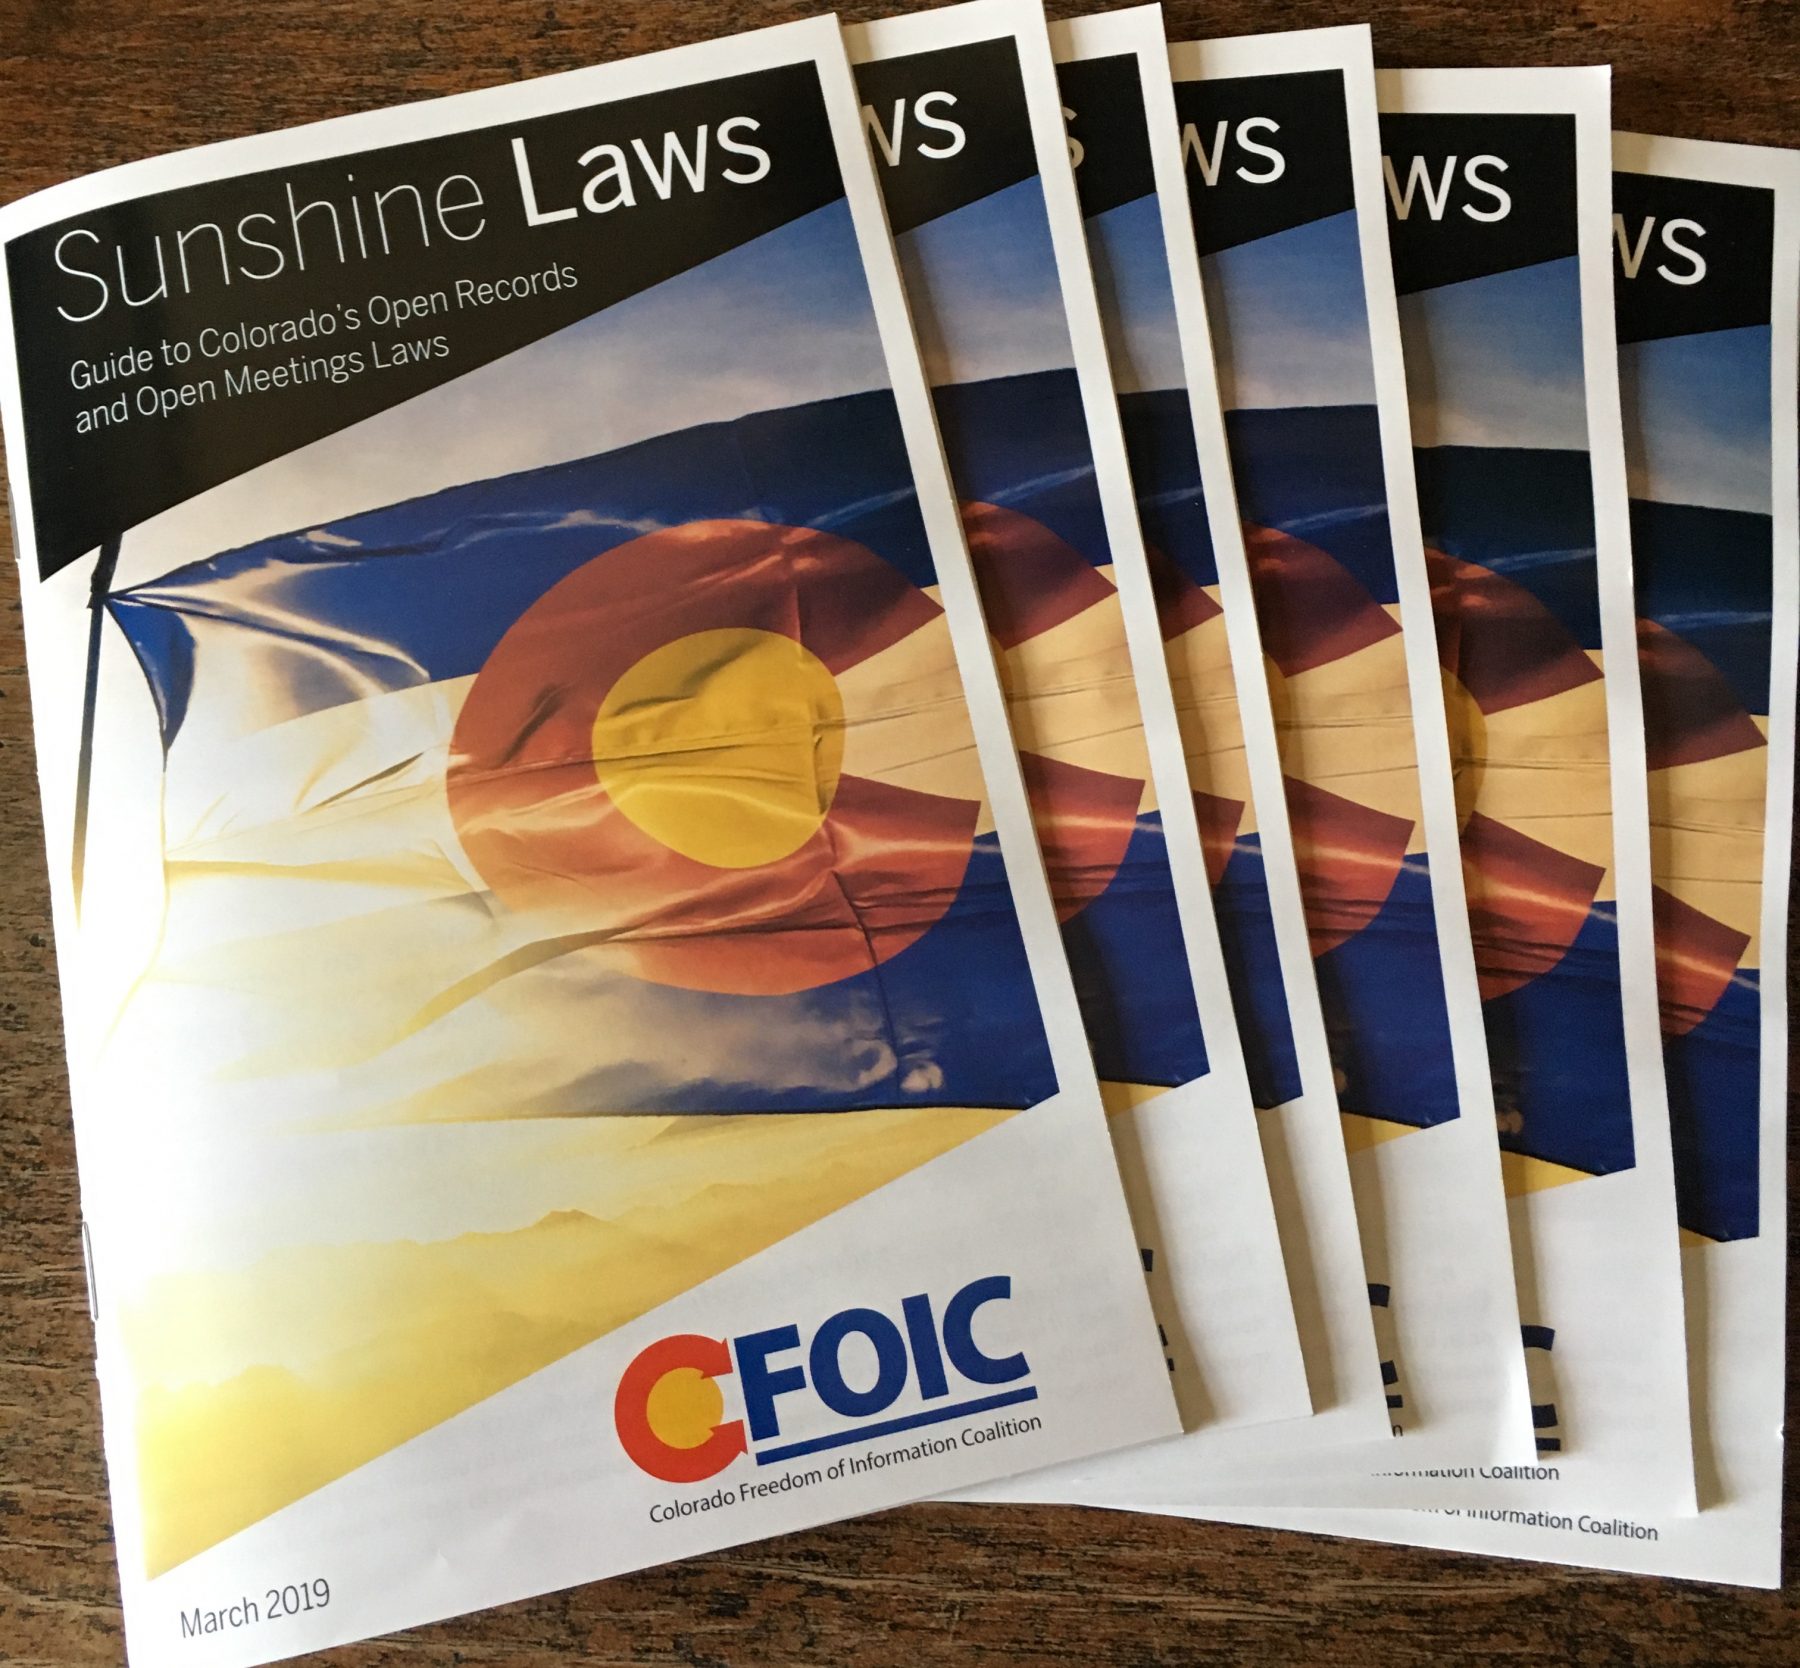 How to get a copy of CFOIC’s new guide to Colorado sunshine laws